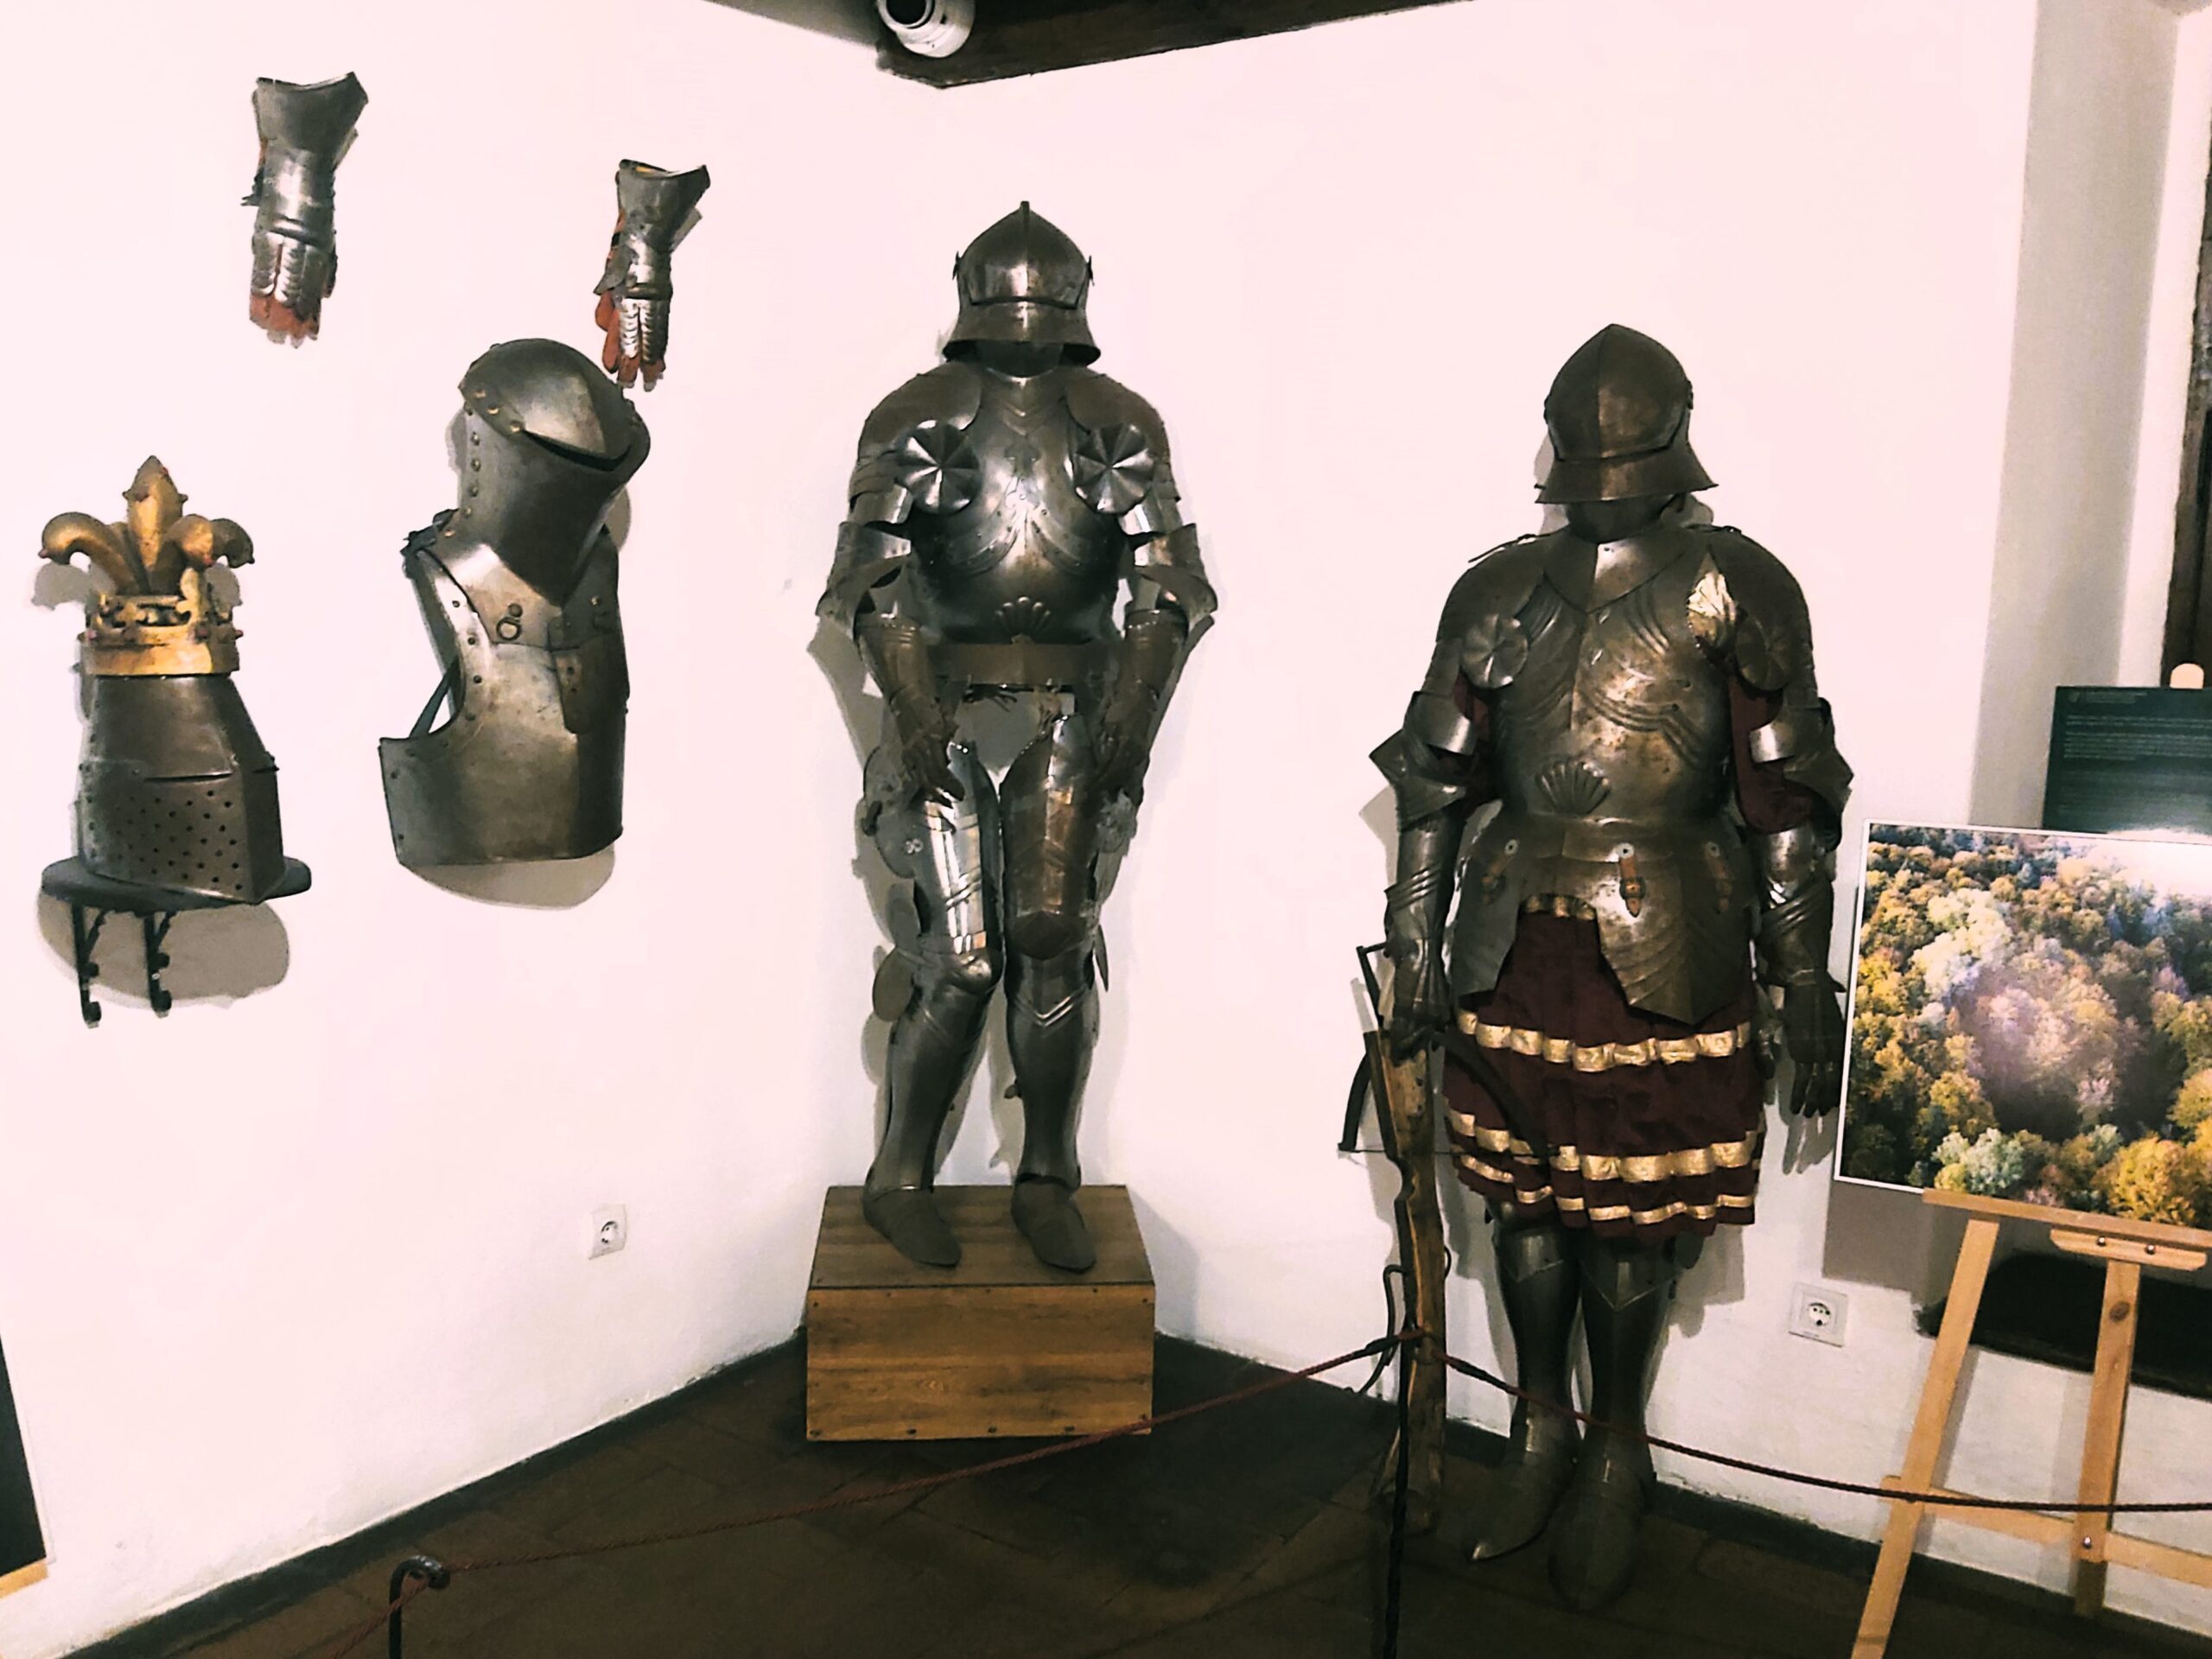 Several suits of armour in Bran Castle, Romania